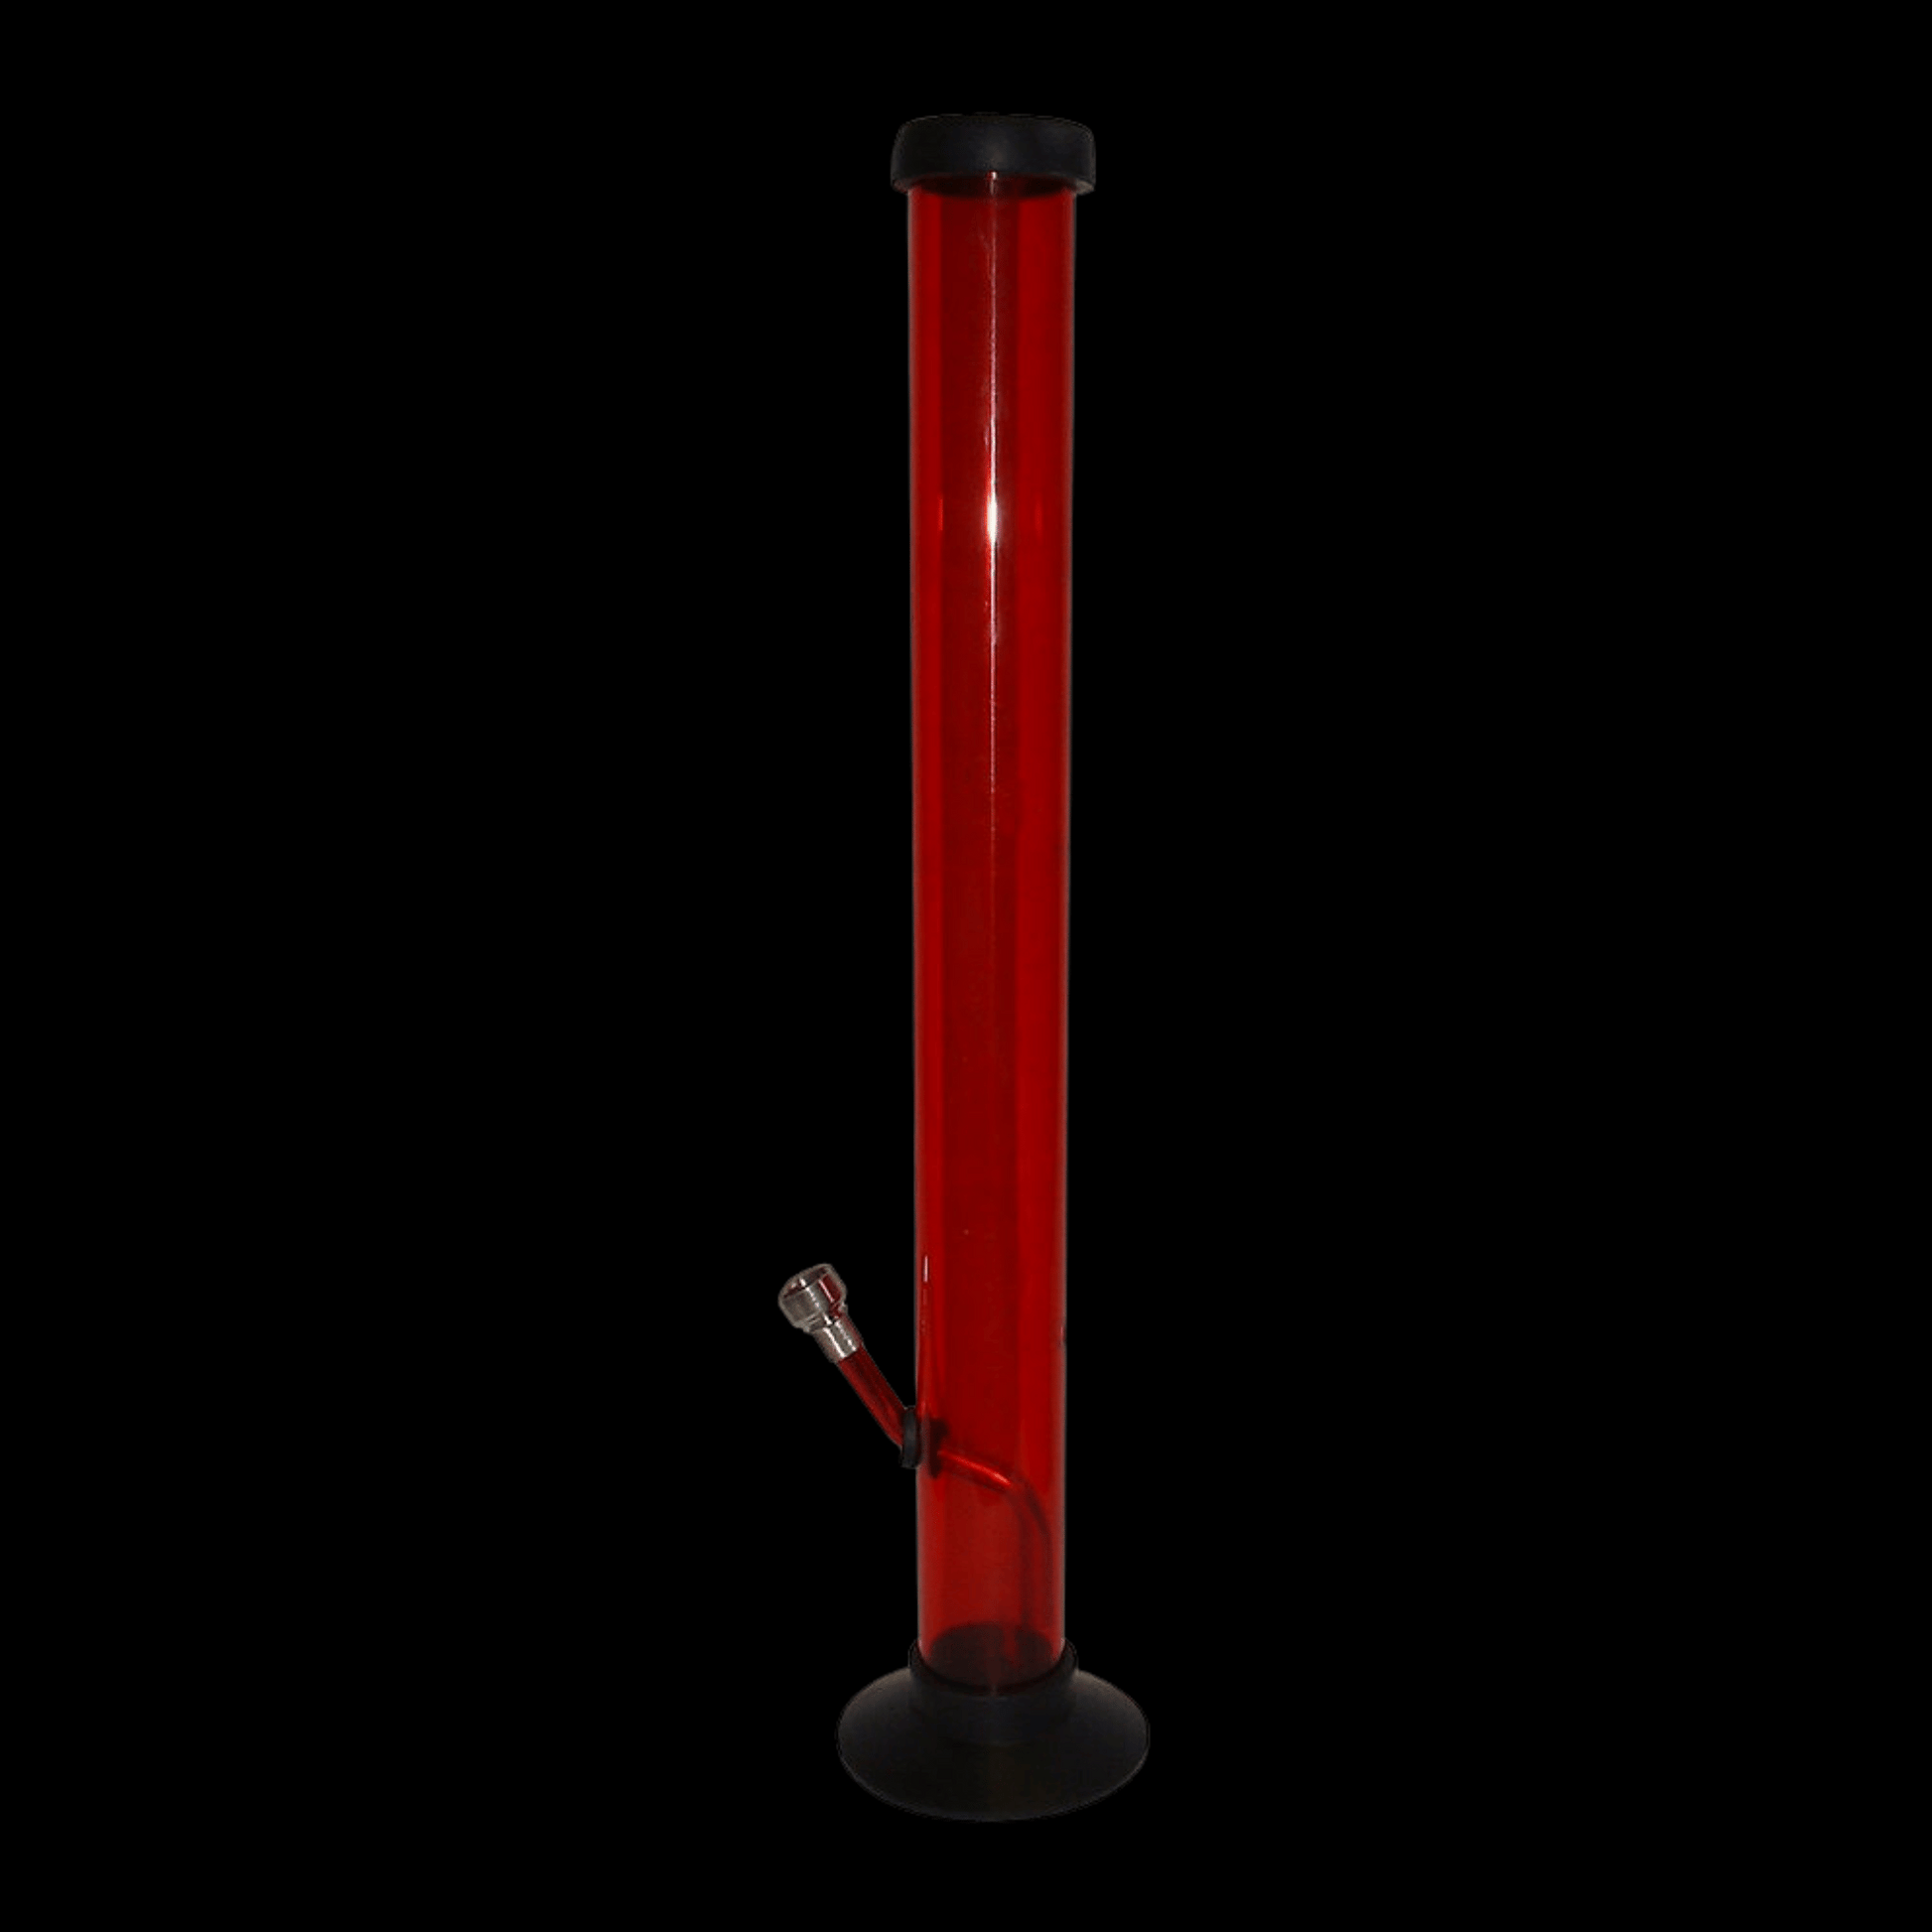 Buy a Bong in the UK, High Quality Glass, Acrylic Bongs